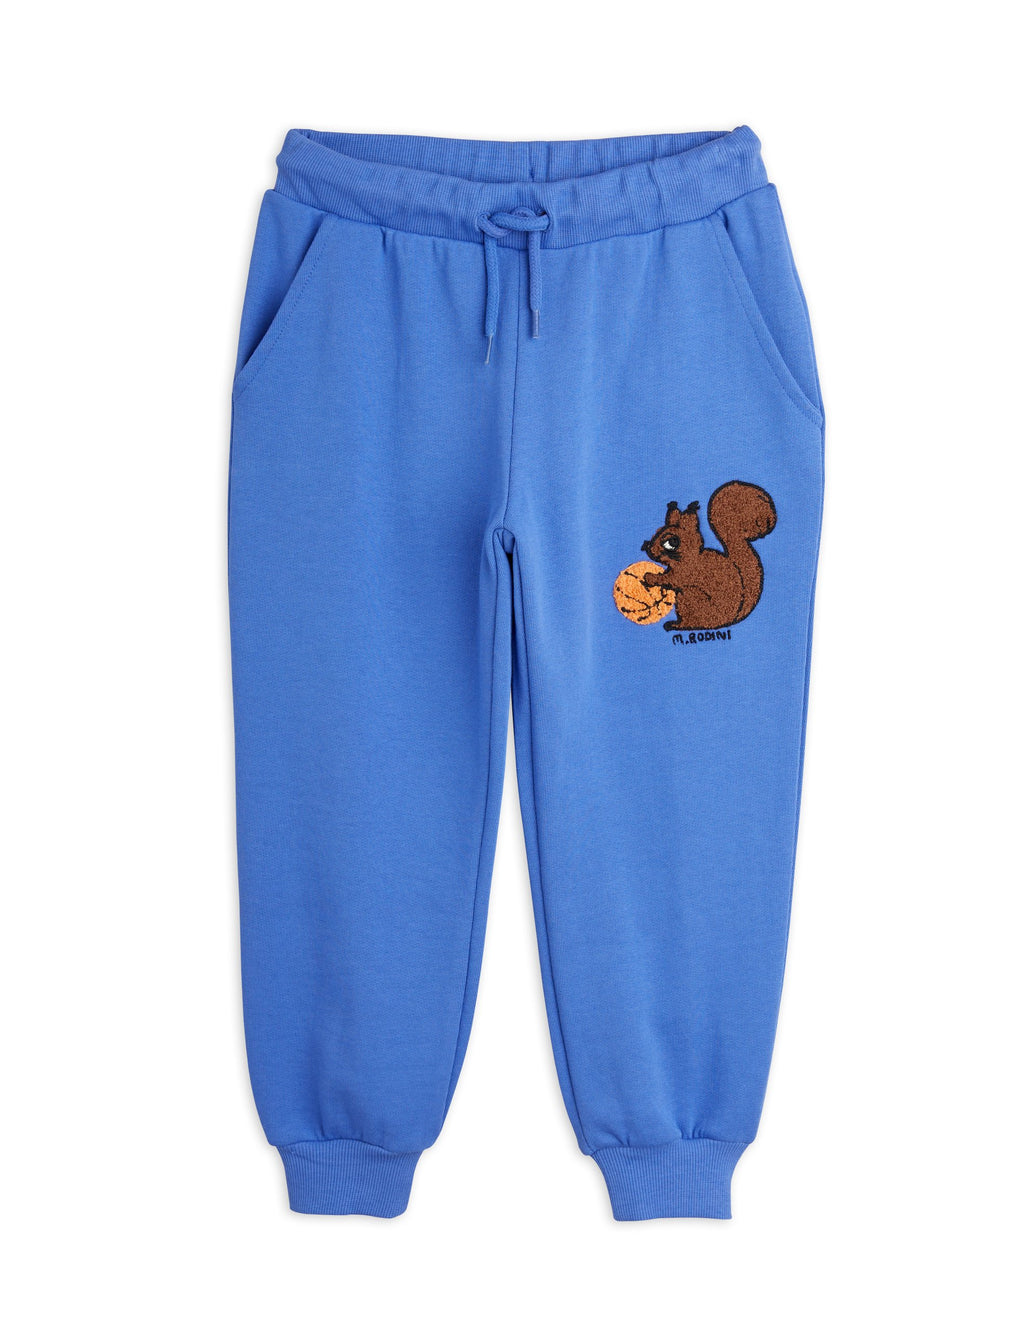 Squirrels Embroidered Sweatpants / Blue